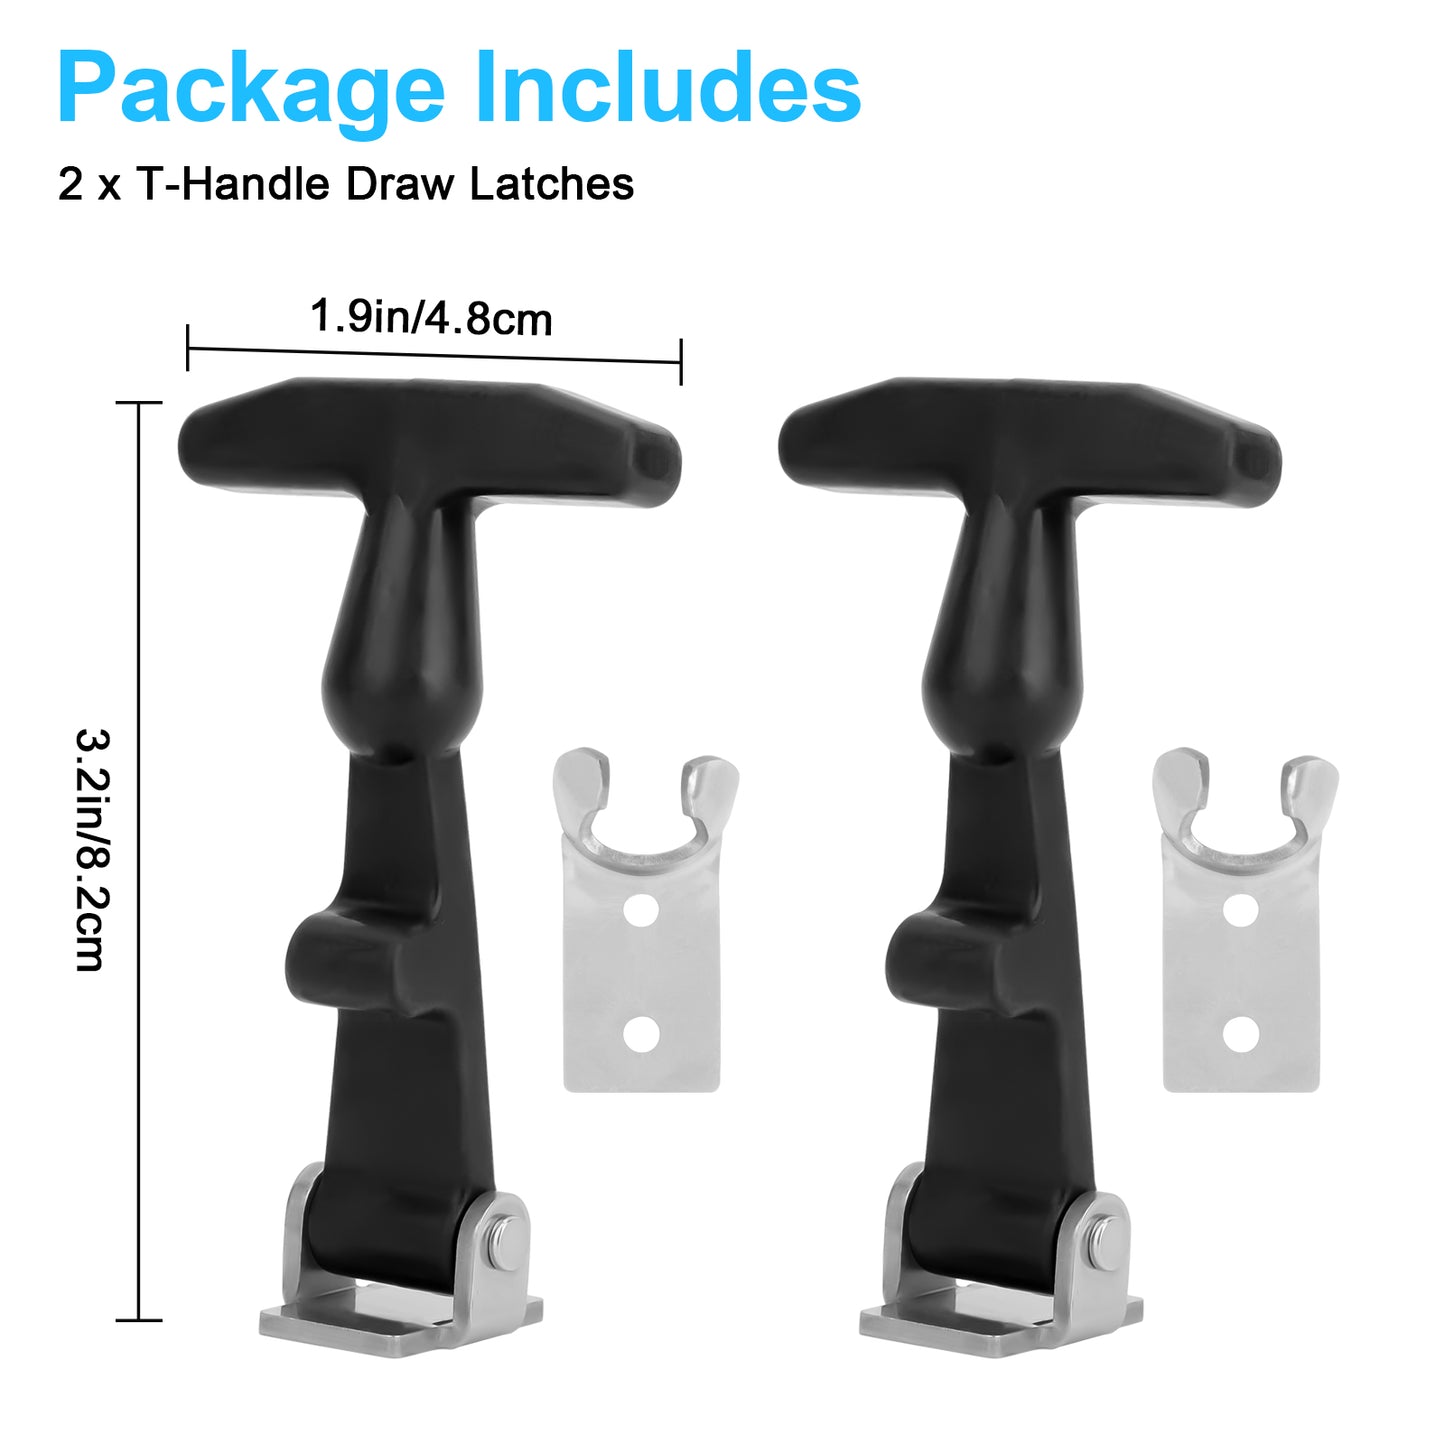 T-Handle Draw Latches (Set of 2) - Durable Rubber and Stainless Steel Latches for Various Applications